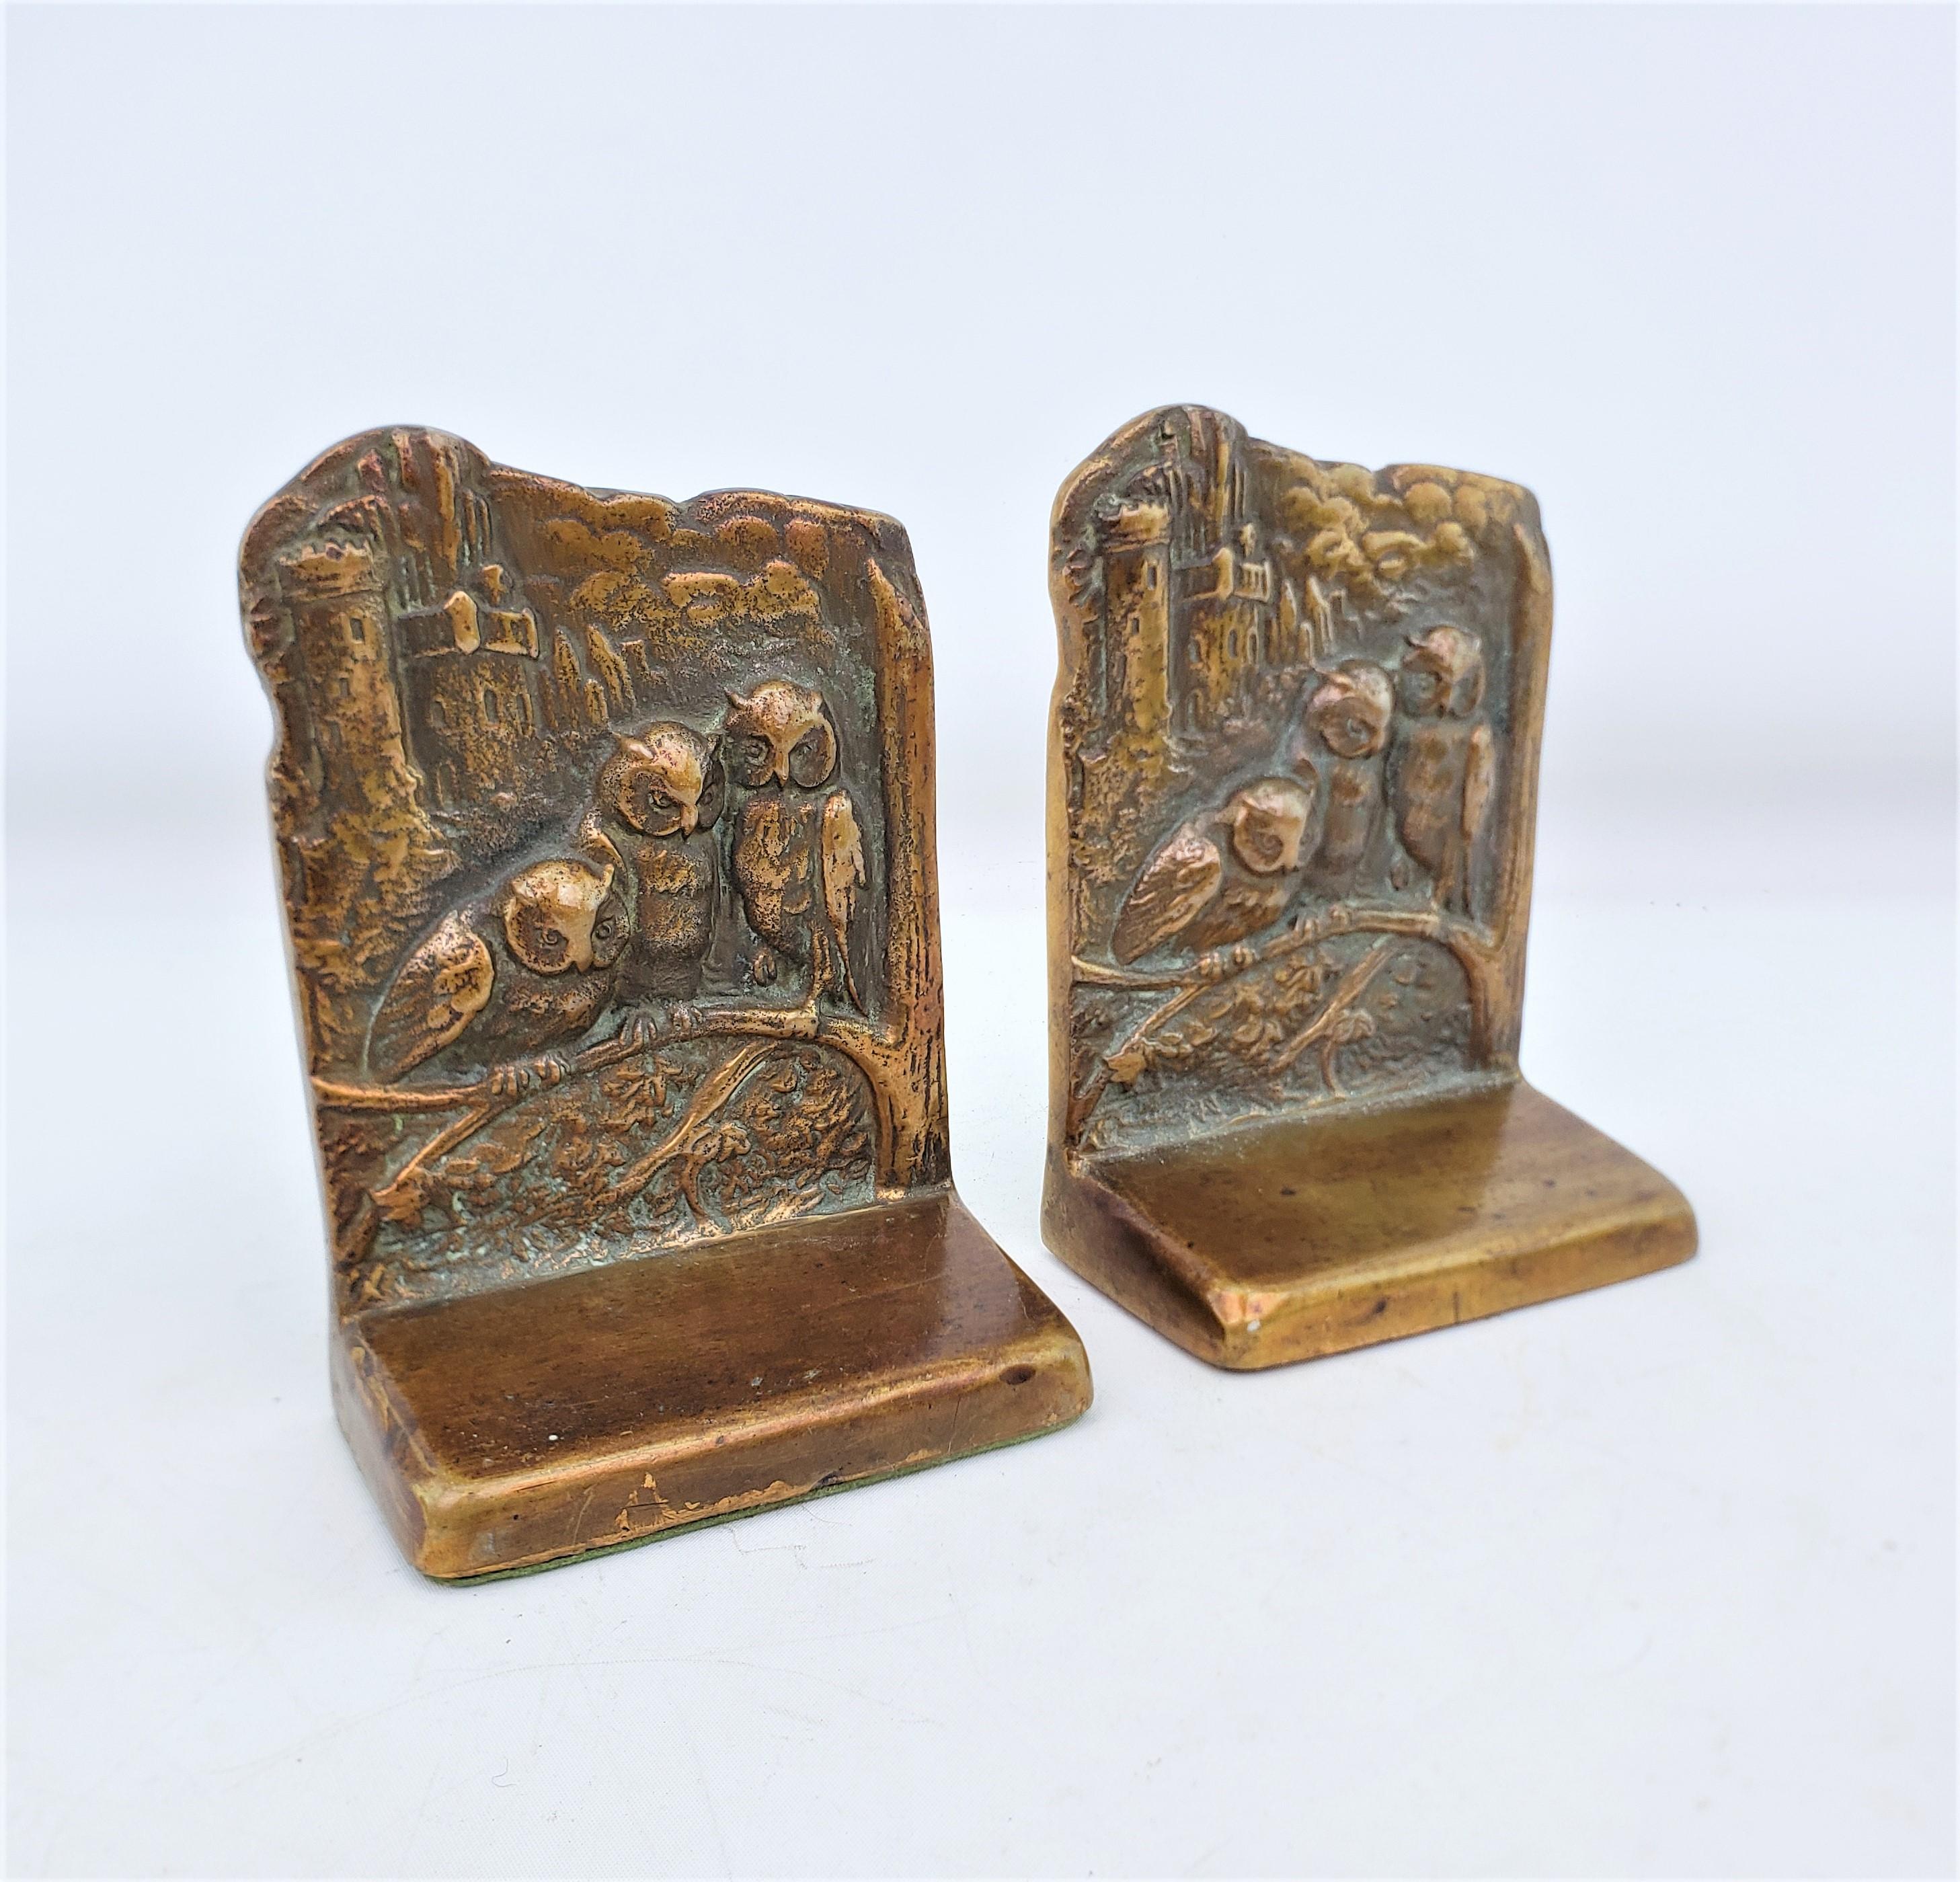 20th Century Antique Art Deco Cast & Patinated Brass Bookends Depicting Three Perched Owls For Sale